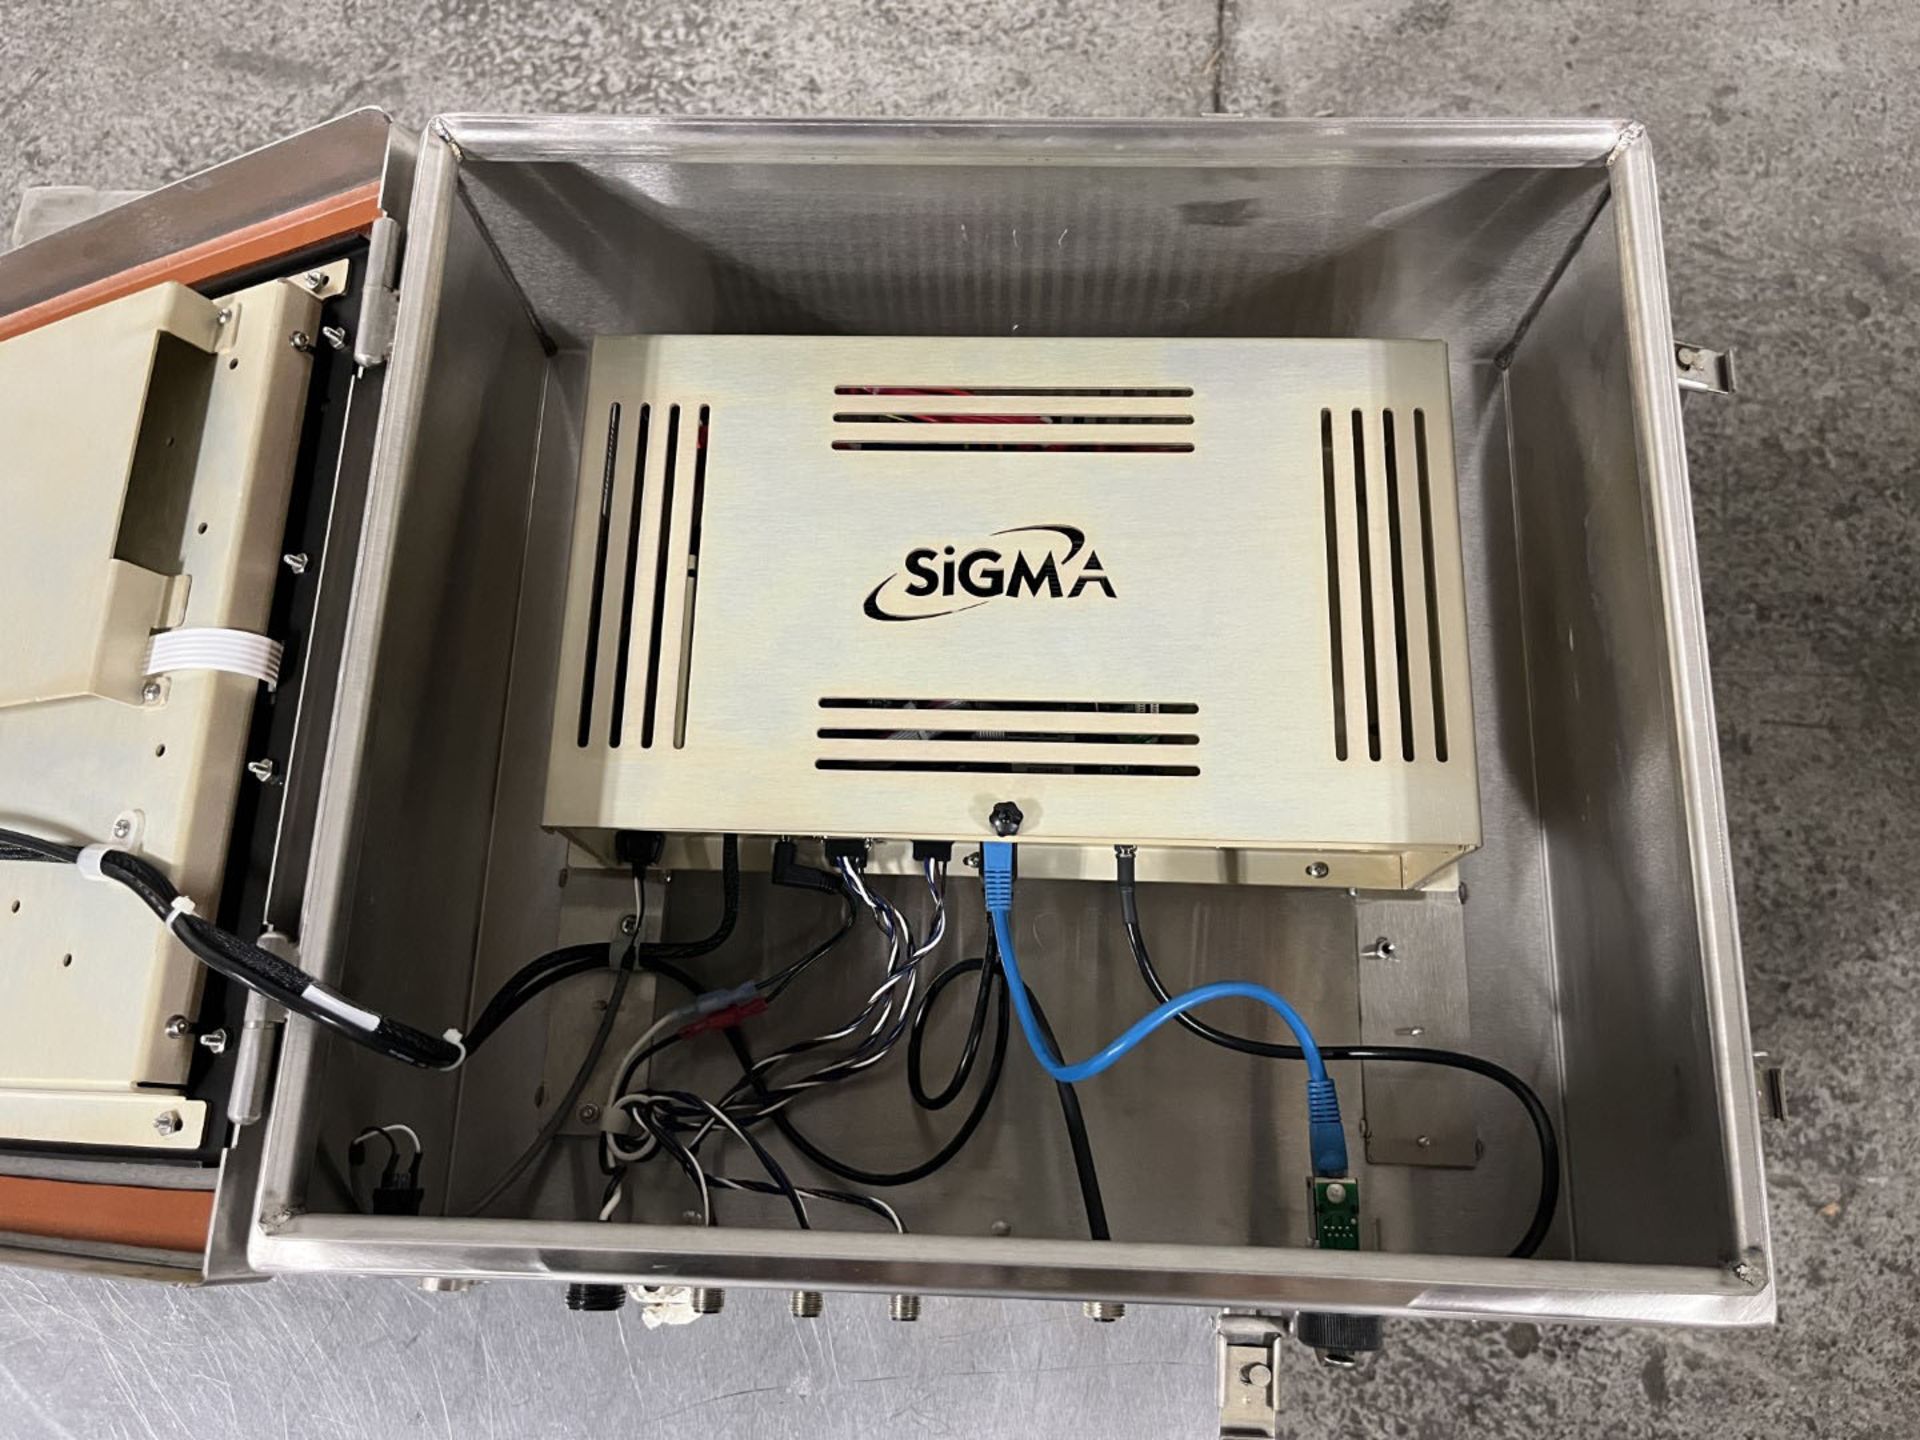 Lot of (5) Sigma display monitors with wires and keyboard (TAG # 1190192) Ships from Cleveland, OH - Image 6 of 7